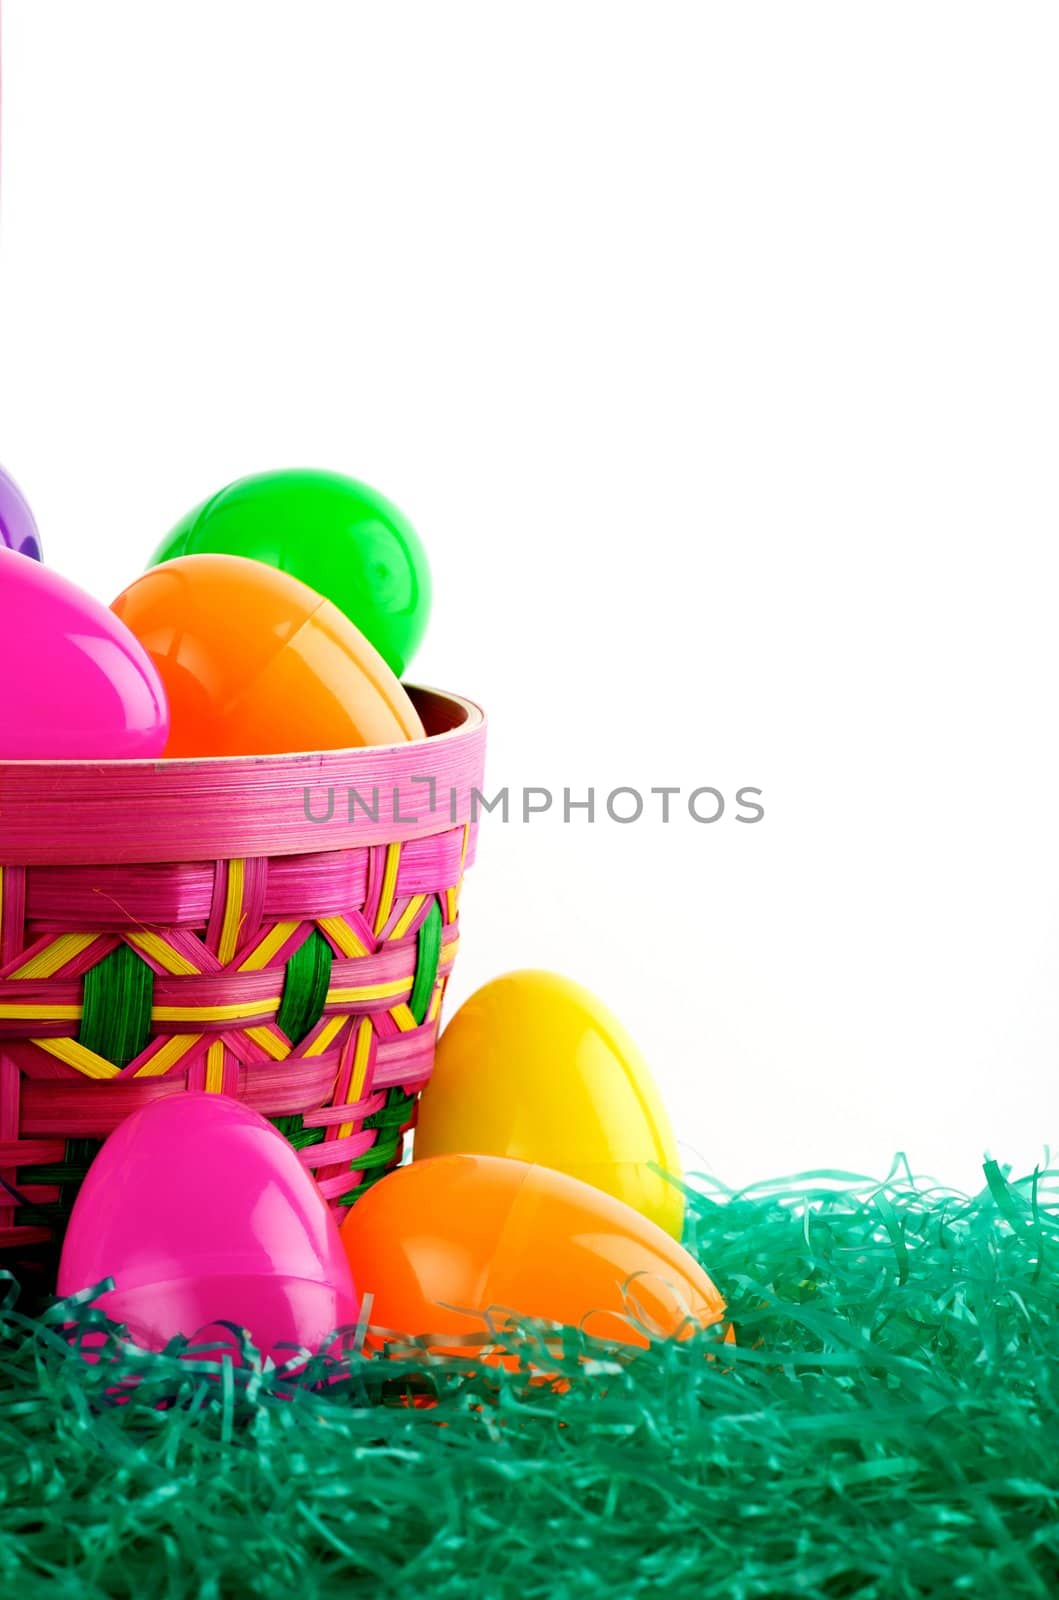 Image of Easter basket with colored eggs